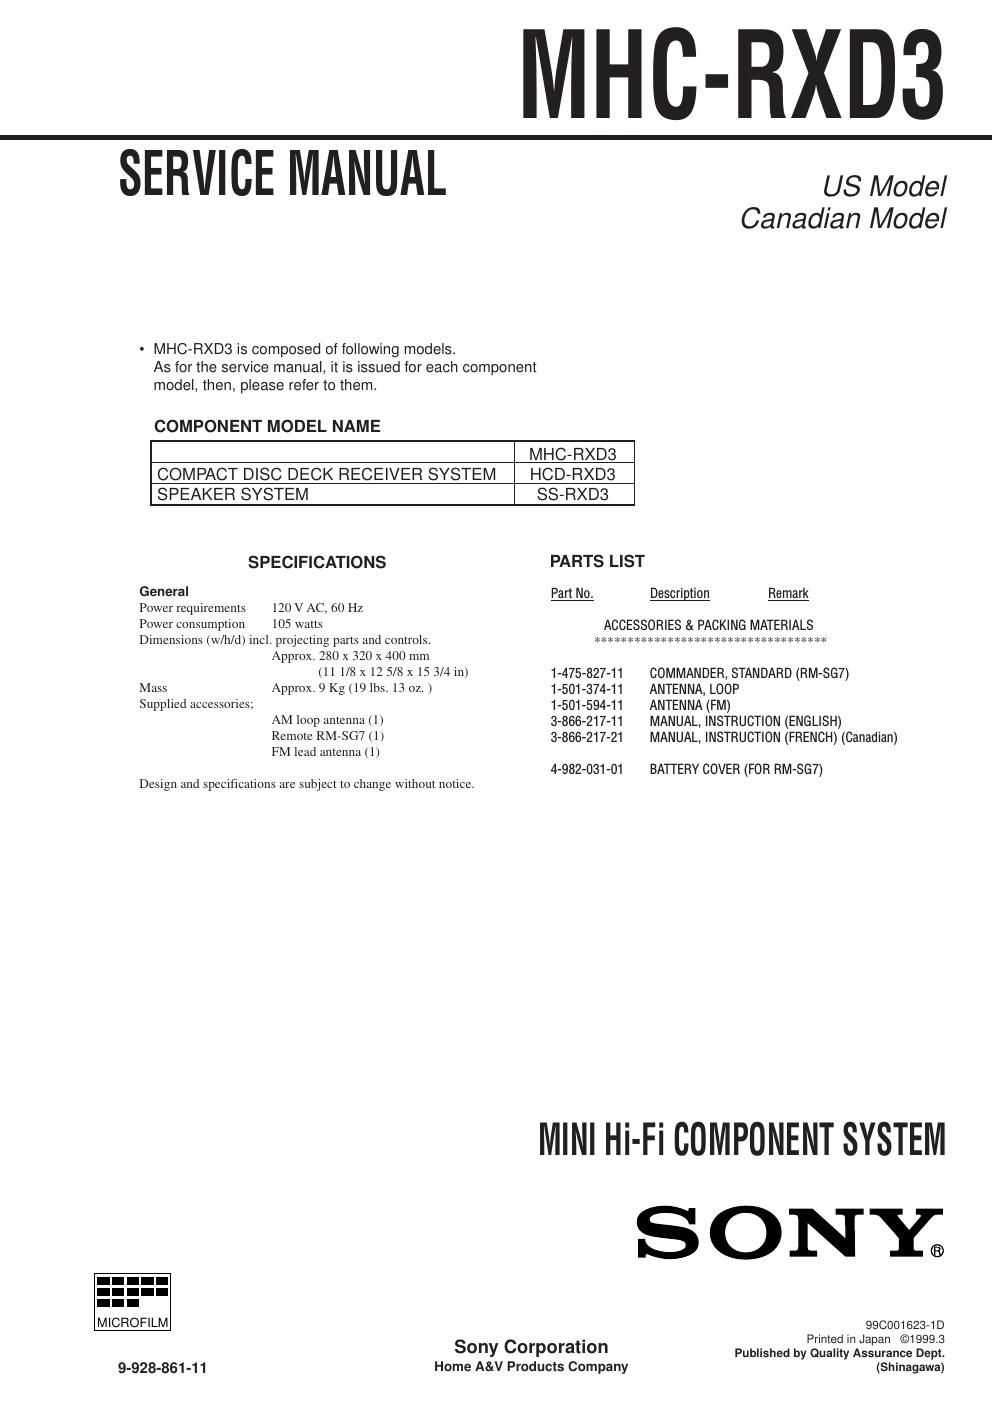 sony mhc rxd 3 service manual